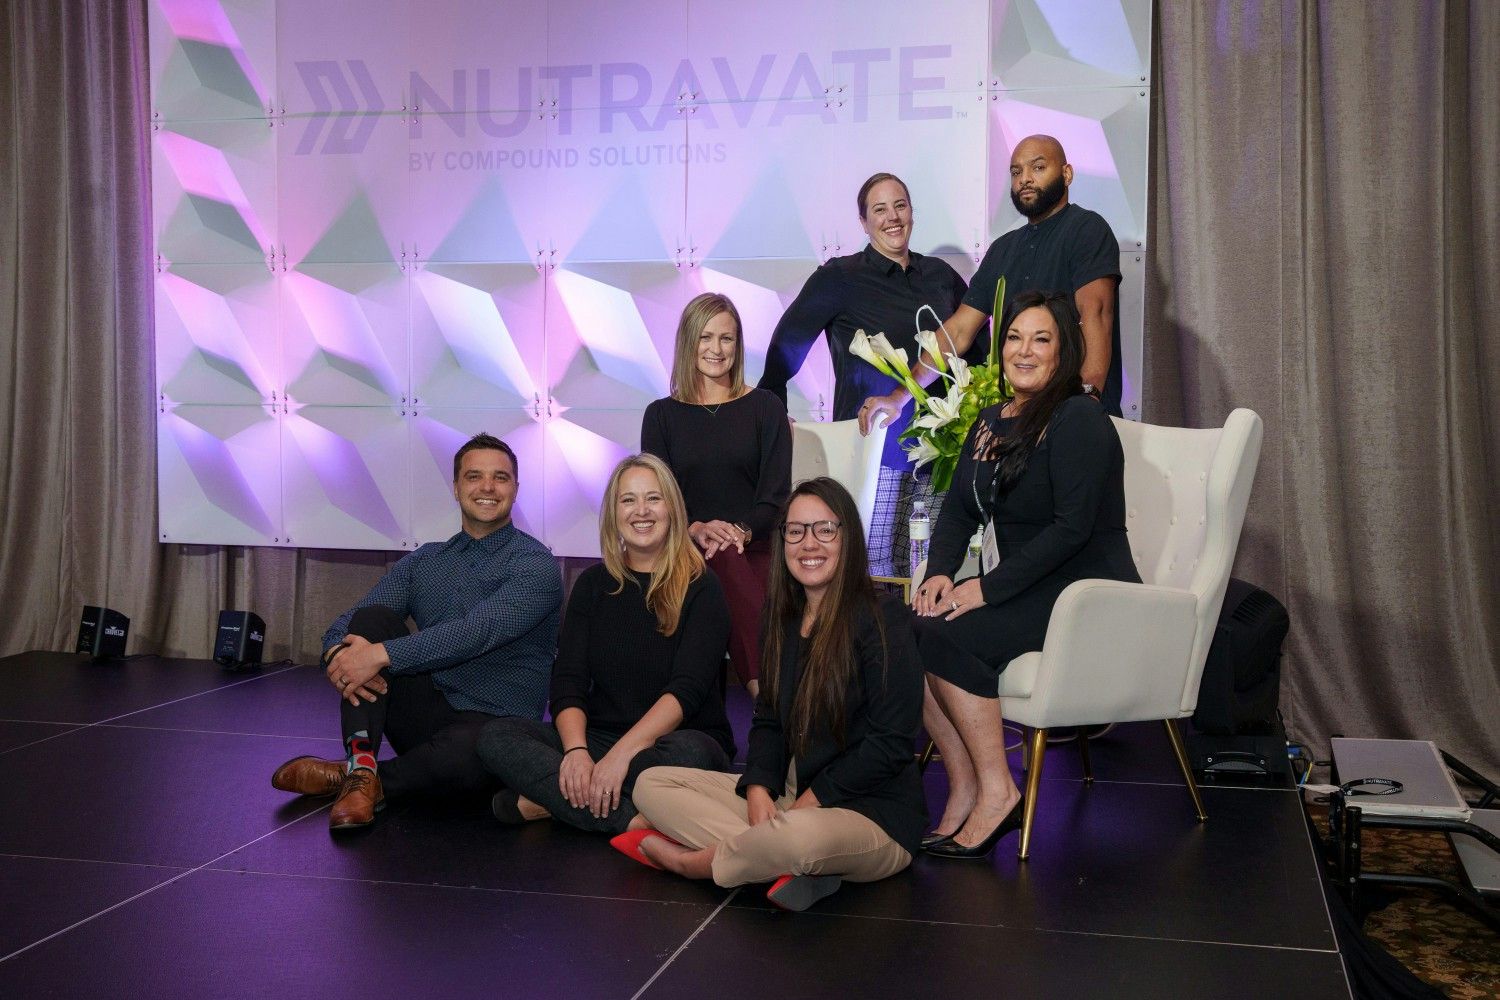 Nutravate™ Summit. The sole global conference focused on nutraceutical innovation.